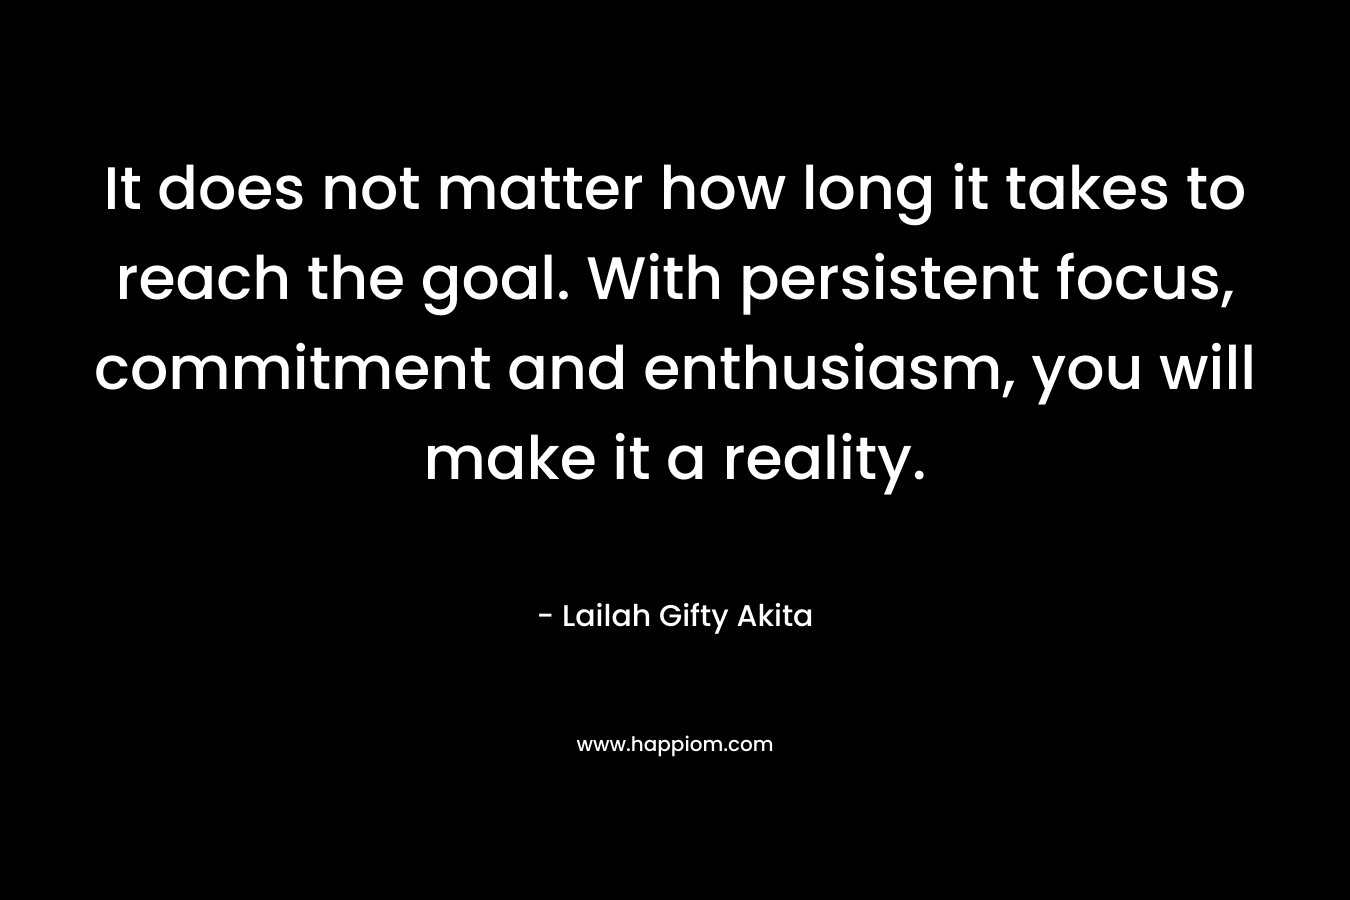 It does not matter how long it takes to reach the goal. With persistent focus, commitment and enthusiasm, you will make it a reality.